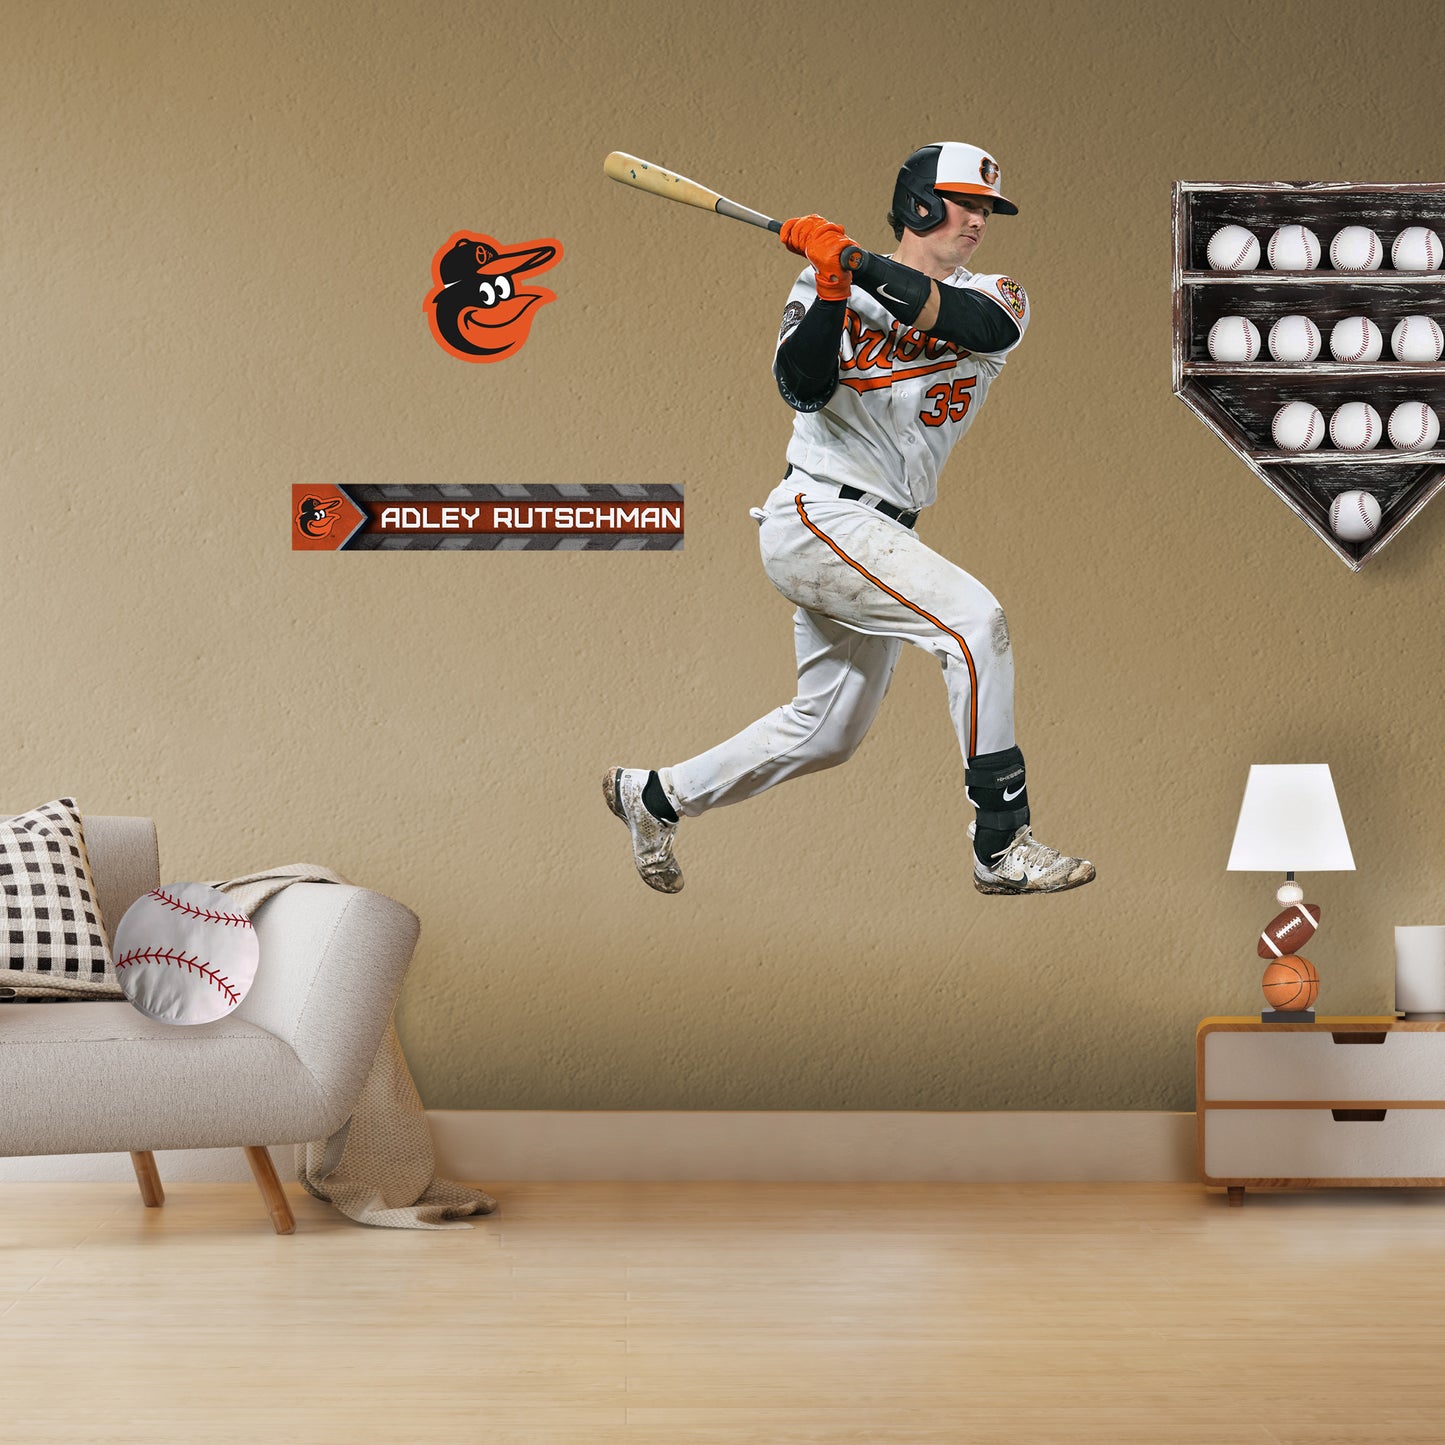 Baltimore Orioles: Adley Rutschman         - Officially Licensed MLB Removable     Adhesive Decal